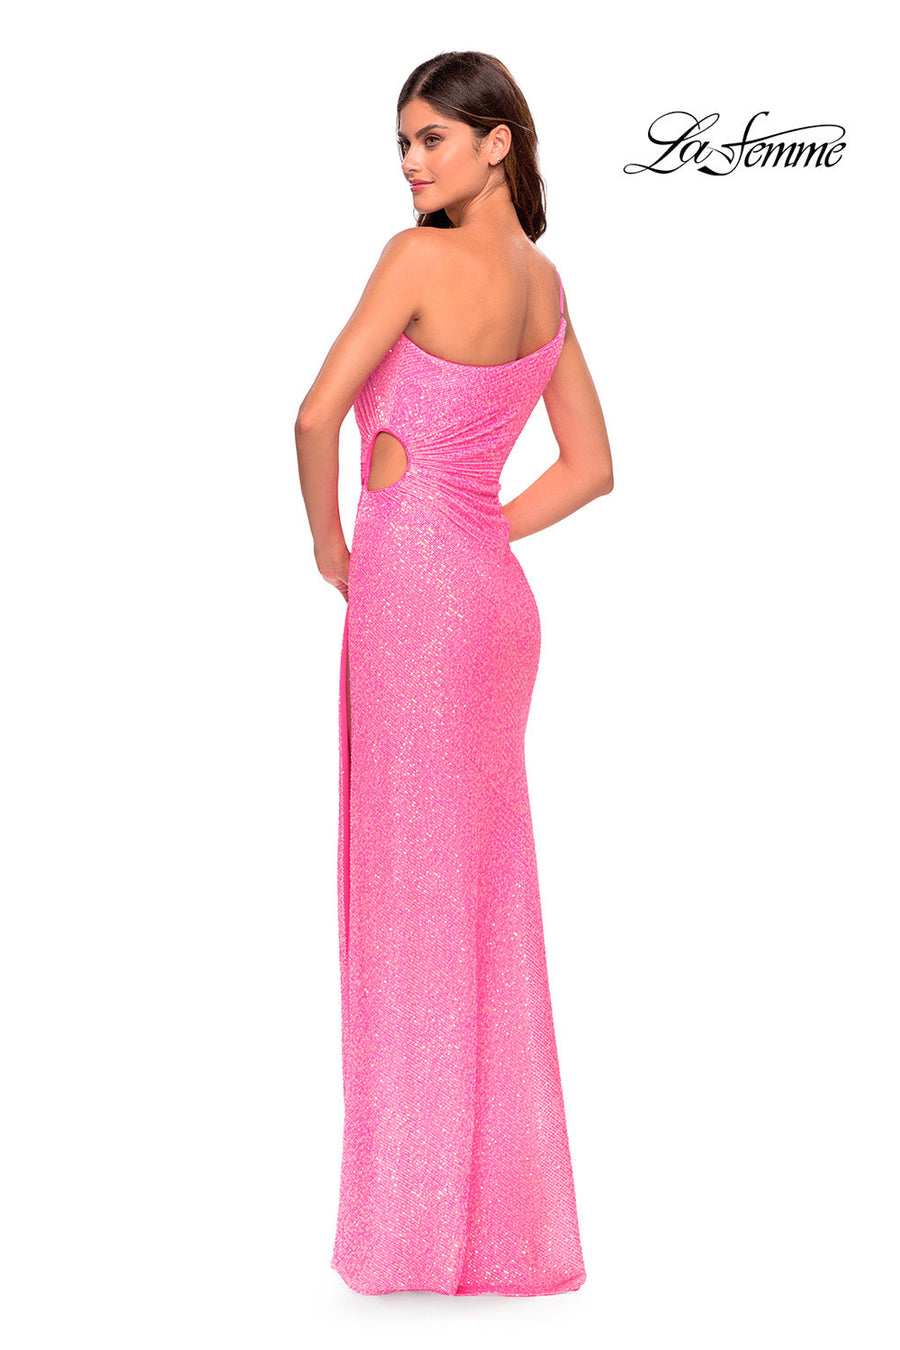 La Femme 31213 prom dress images.  La Femme 31213 is available in these colors: Hot Coral, Neon Pink.